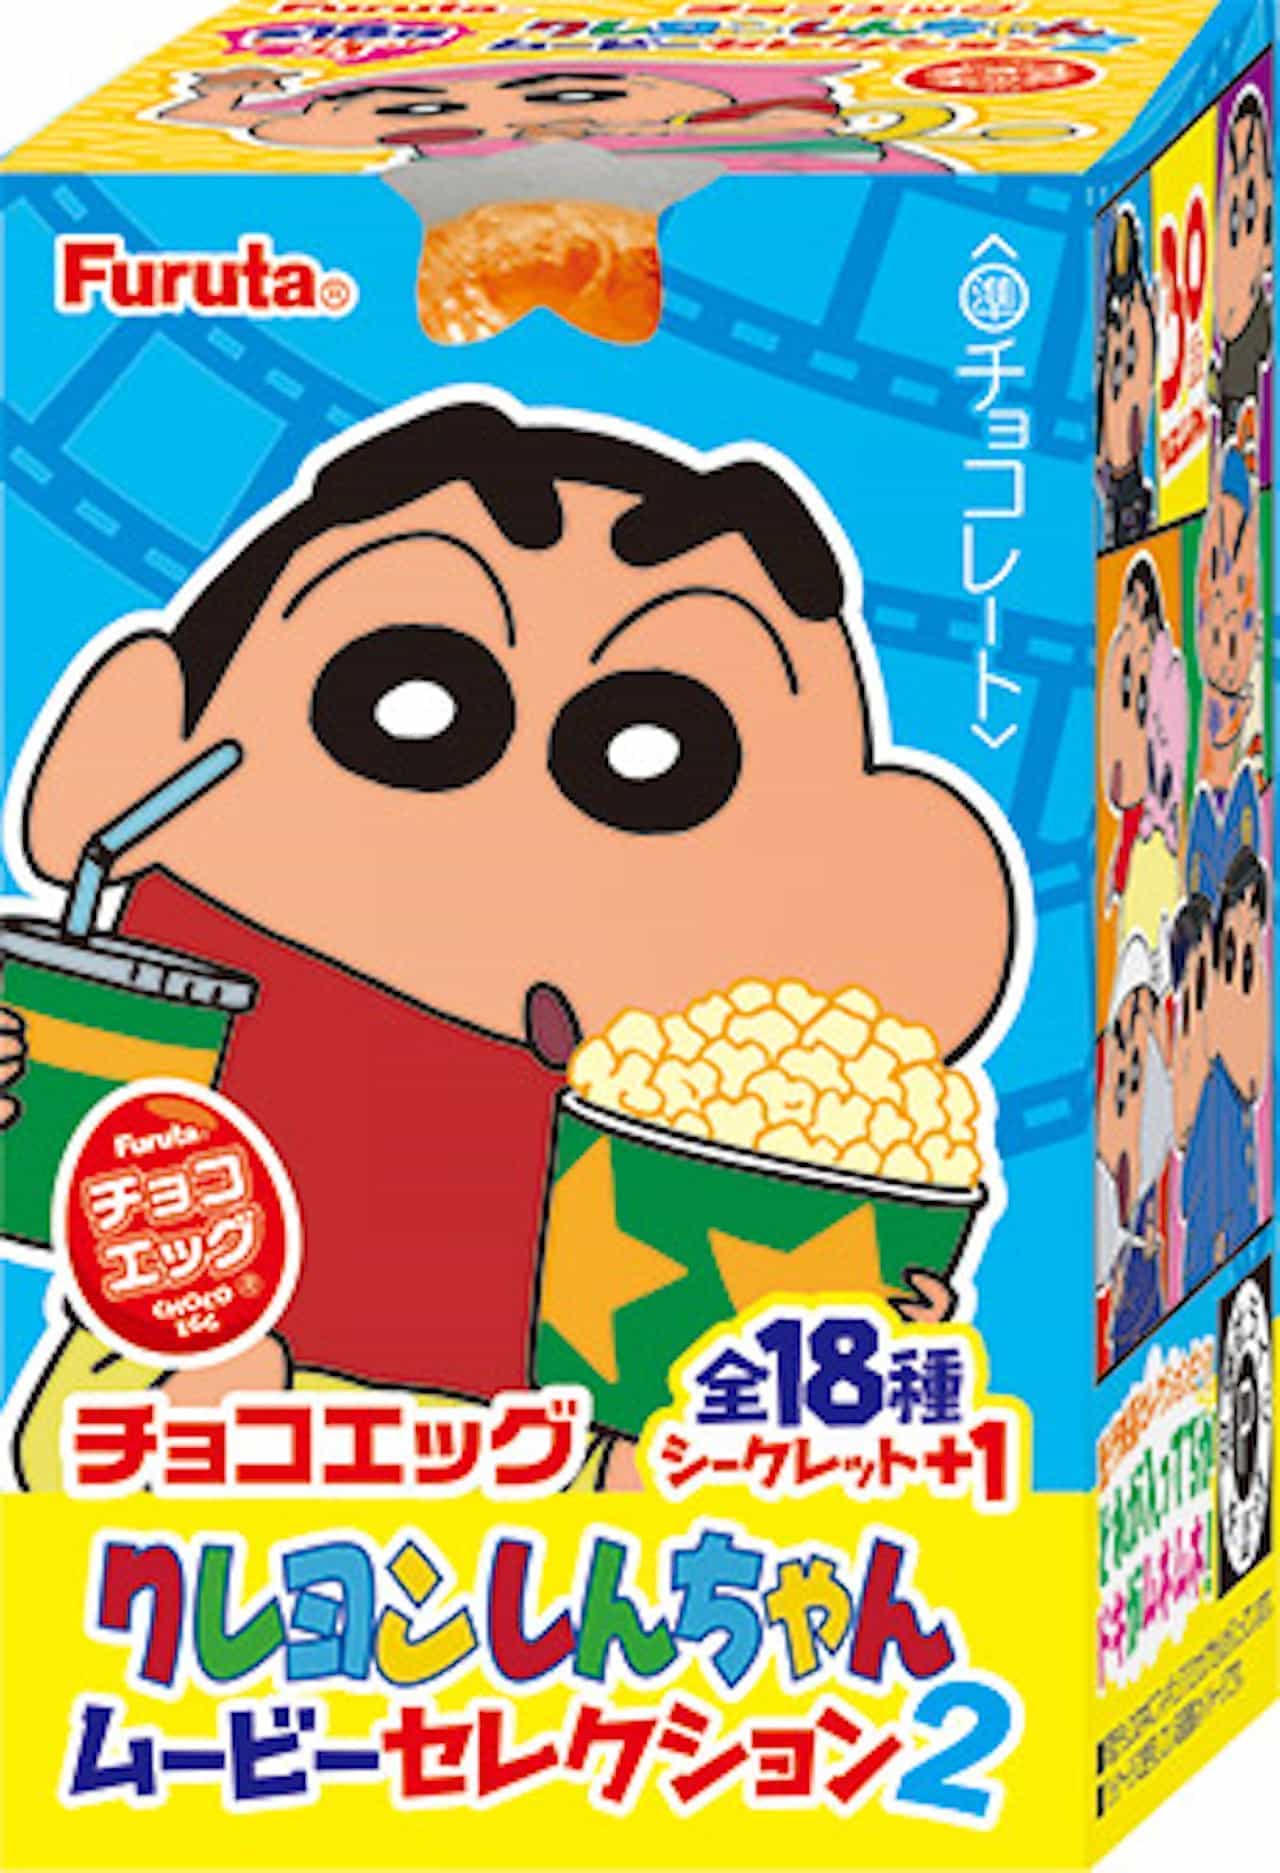 Shin-chan characters dressed in selected movie costumes from all the 